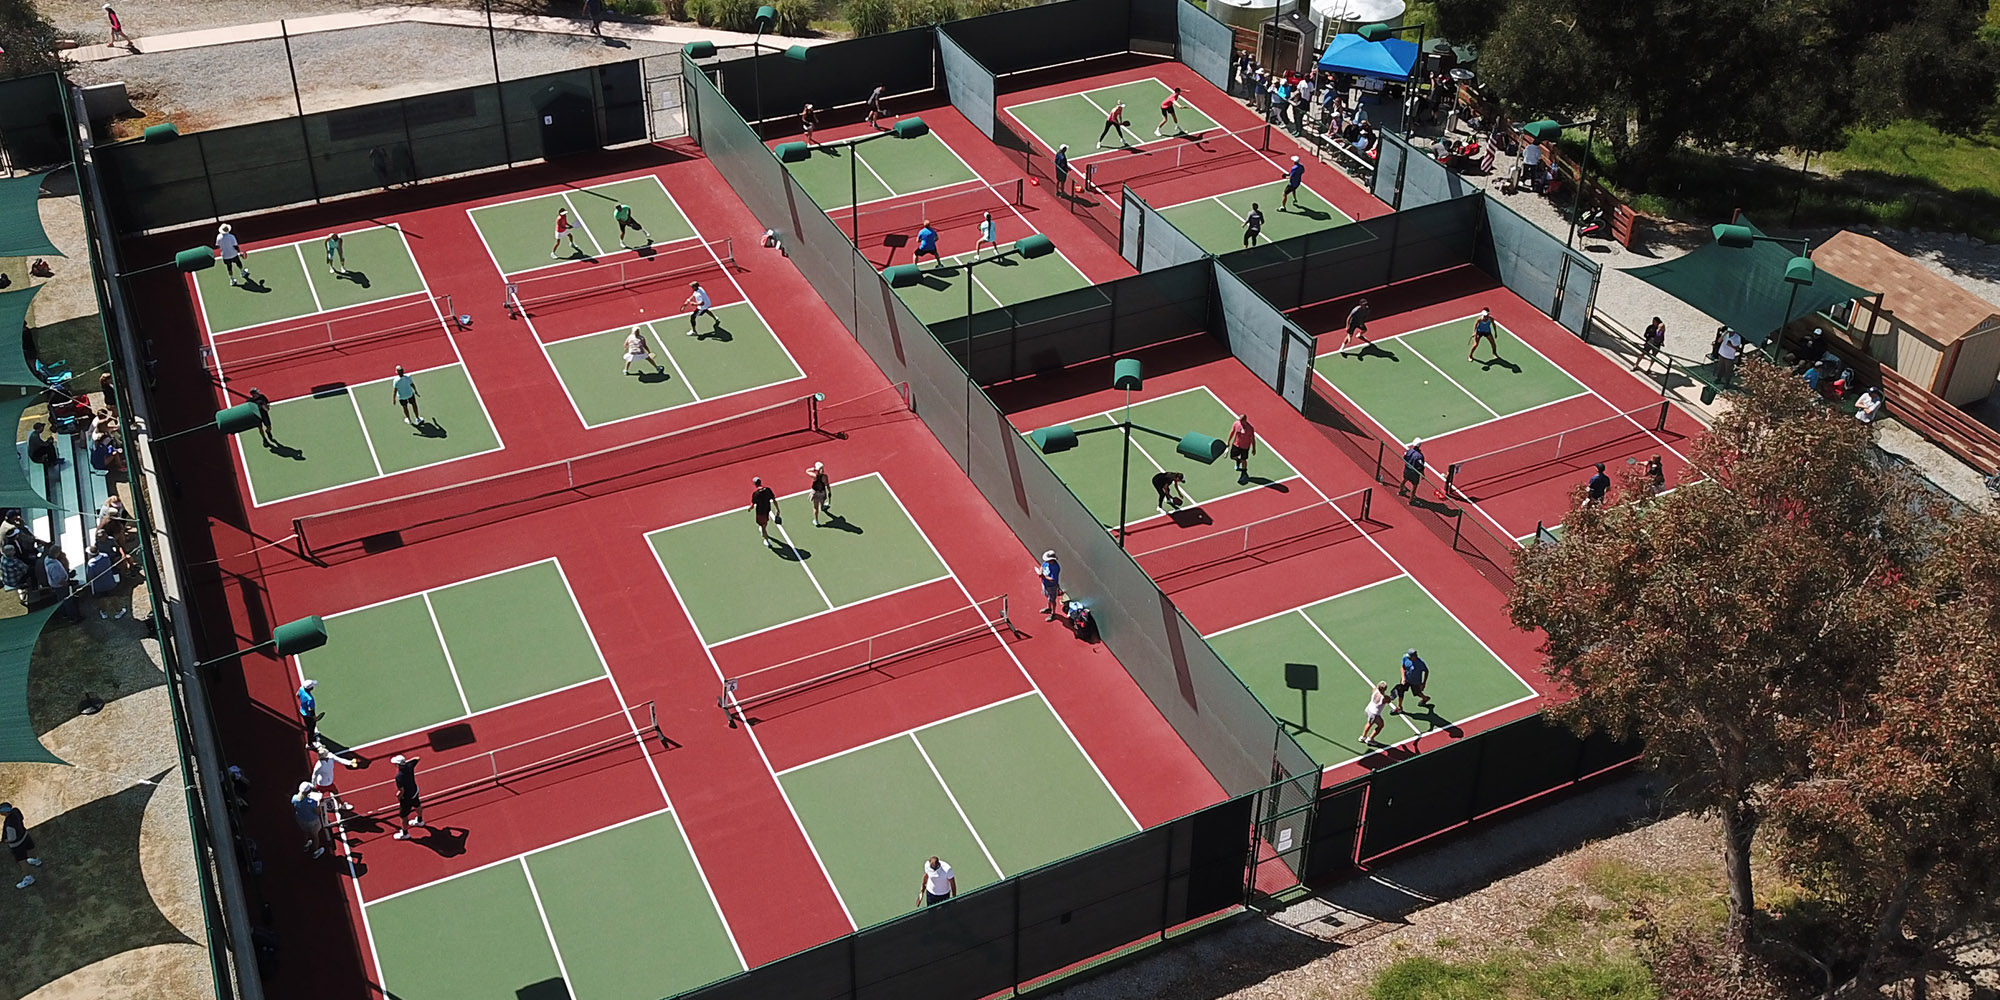 Eight lighted pickleball courts